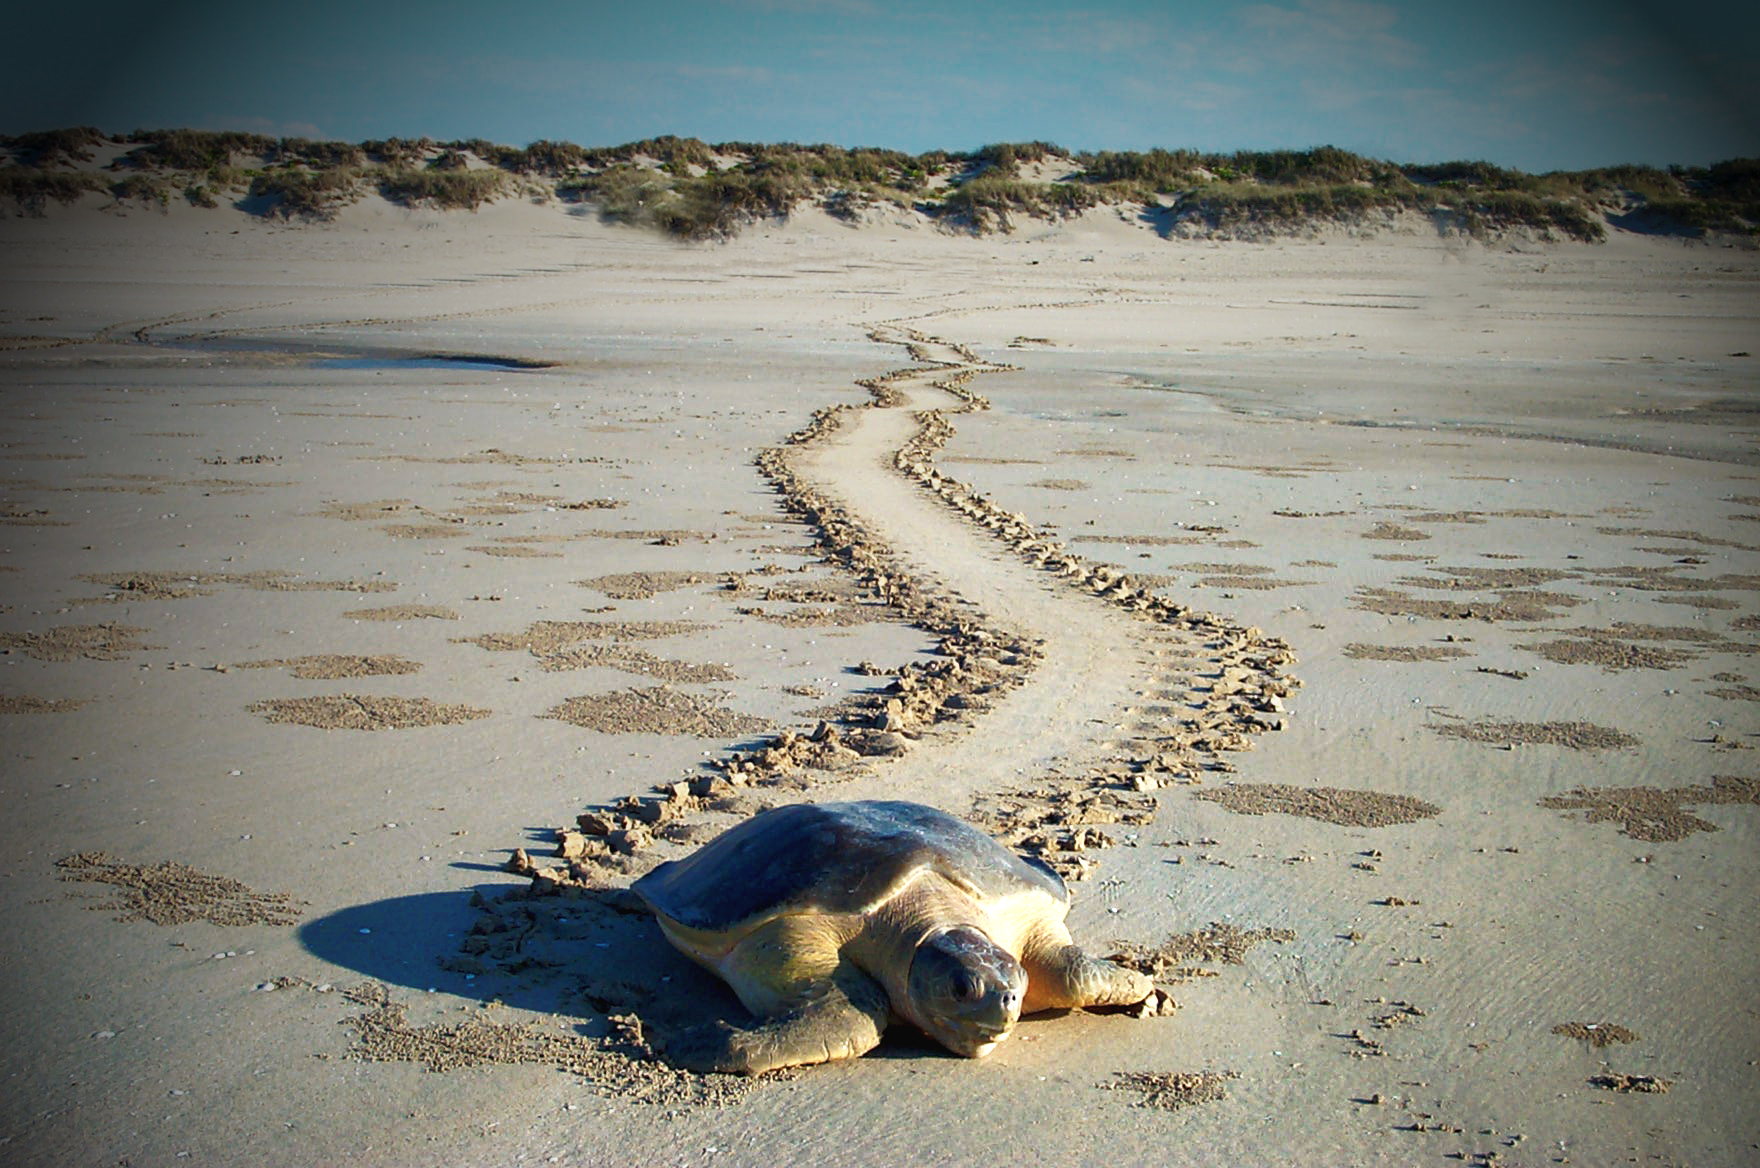 Turtle season arrives in Port Hedland with first nesting sites confirmed